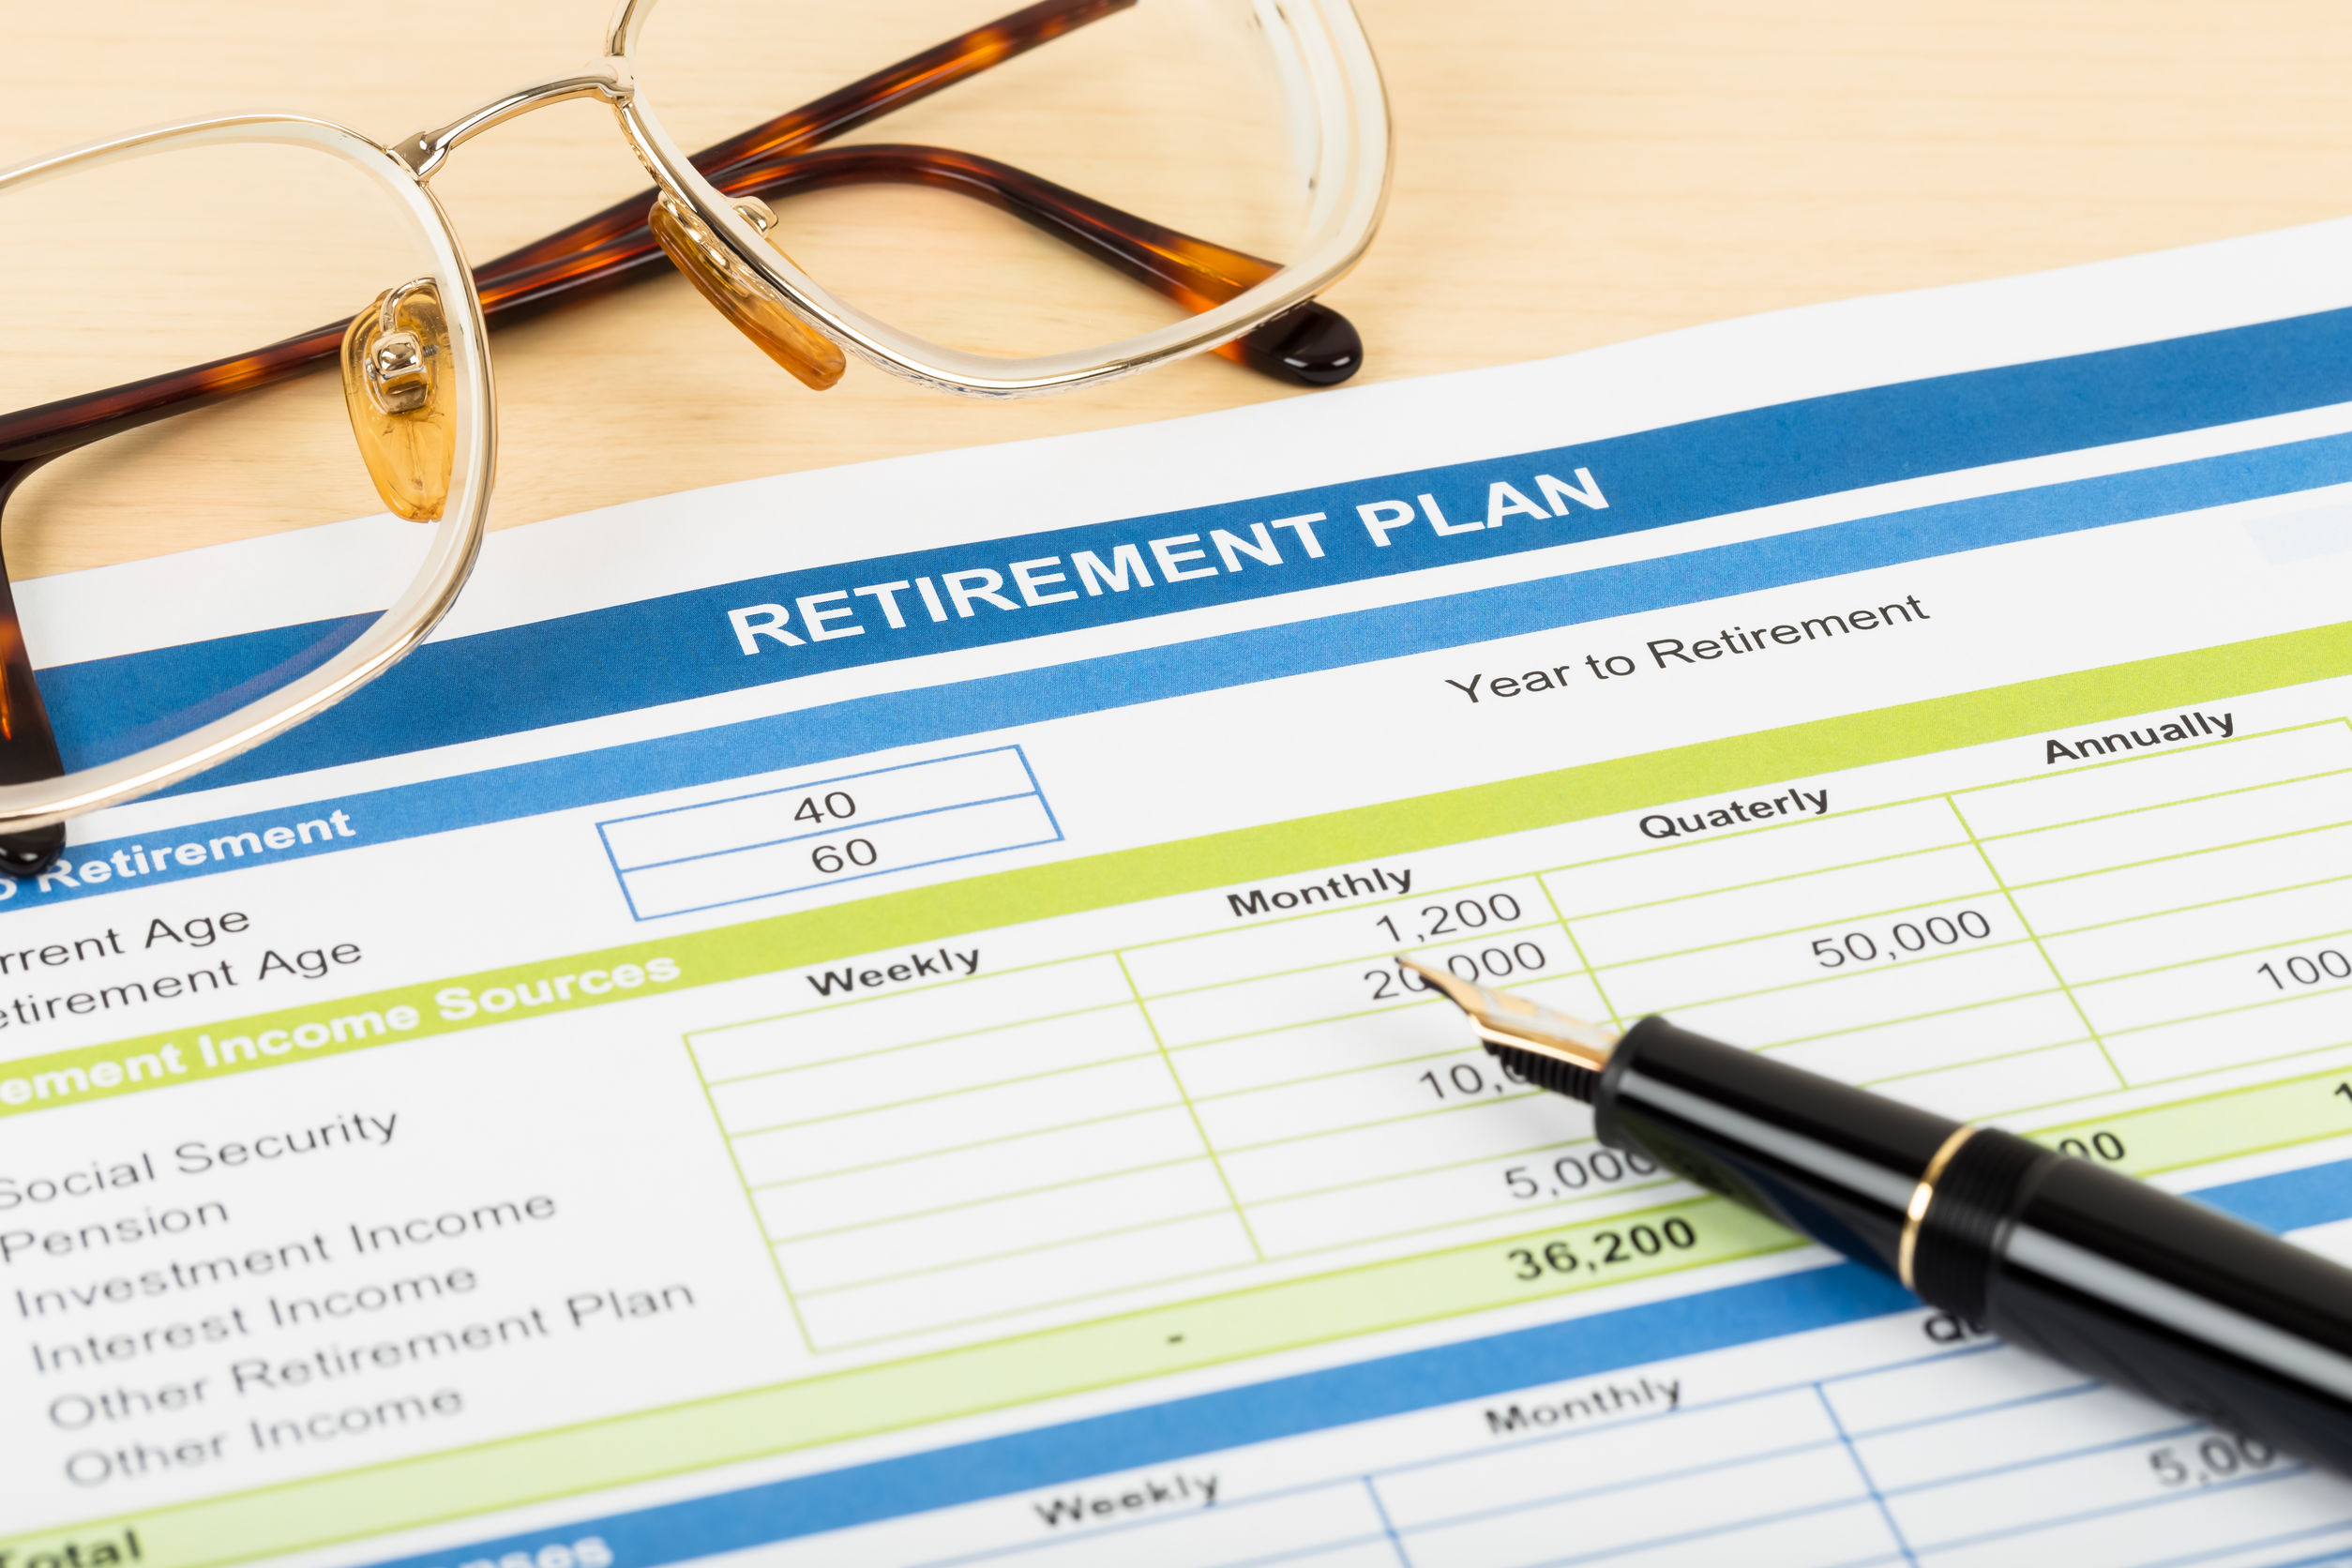 Immediate Actions Needed by Retirement Plans to Comply with the SECURE Act of 2019